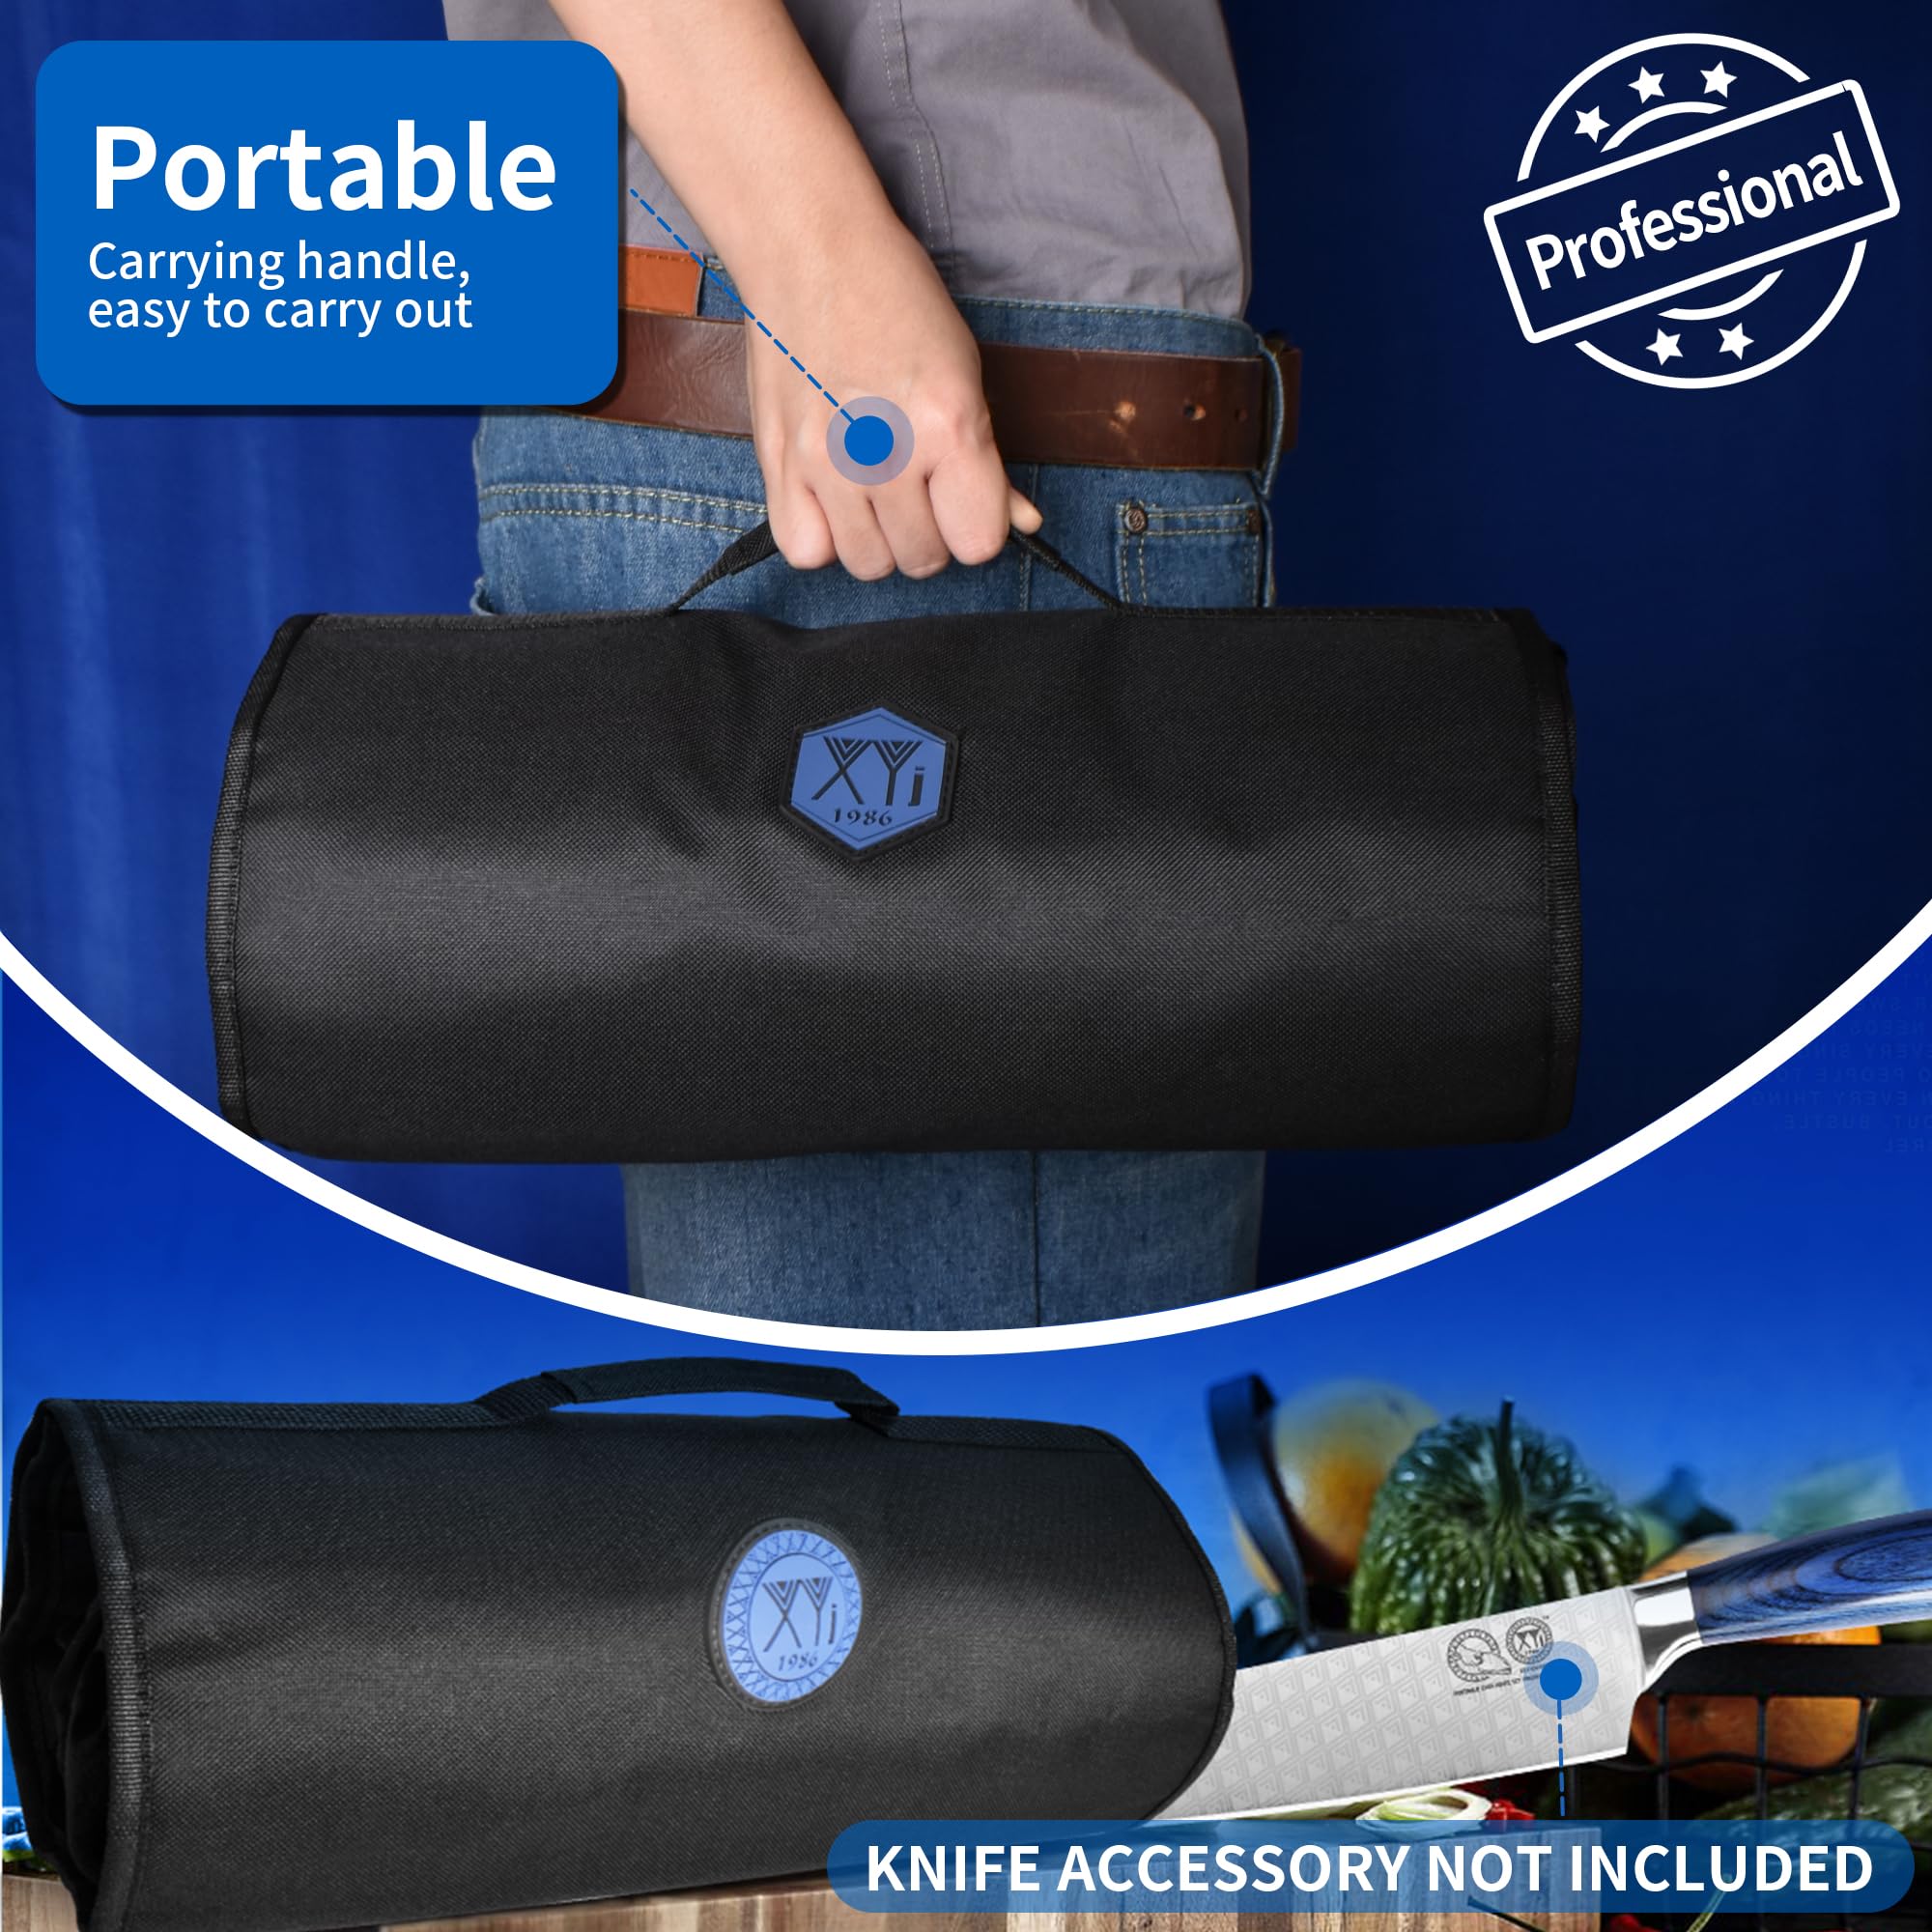 XYJ Kithcen Knife Roll Bag (13 slots) Holds 12pcs Knives and Sharpener Rod Chef Cooking Portable Durable Storage Pockets Black Roll Bag Carry Case Bag (Knives Not Included)